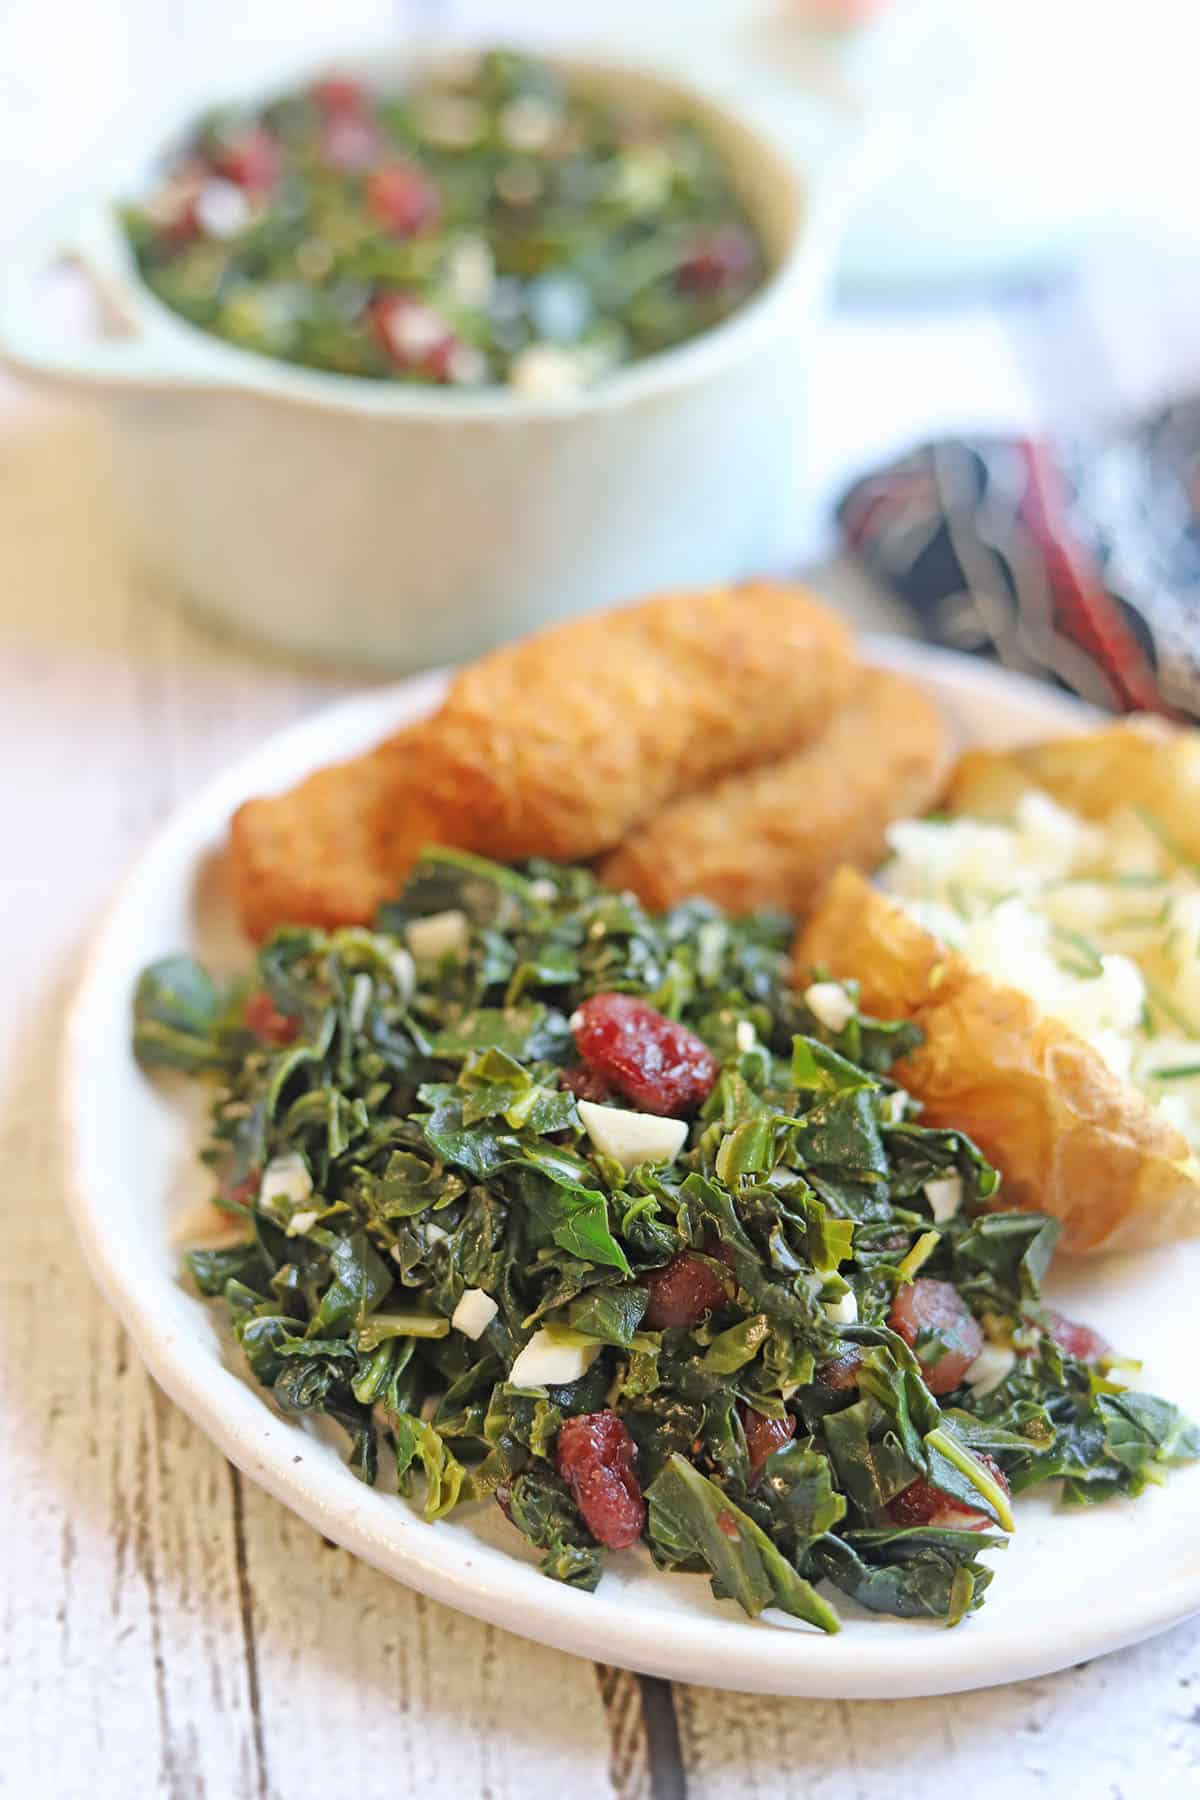 Collard greens with cranberries on plate by baked potato and vegan chicken strips.